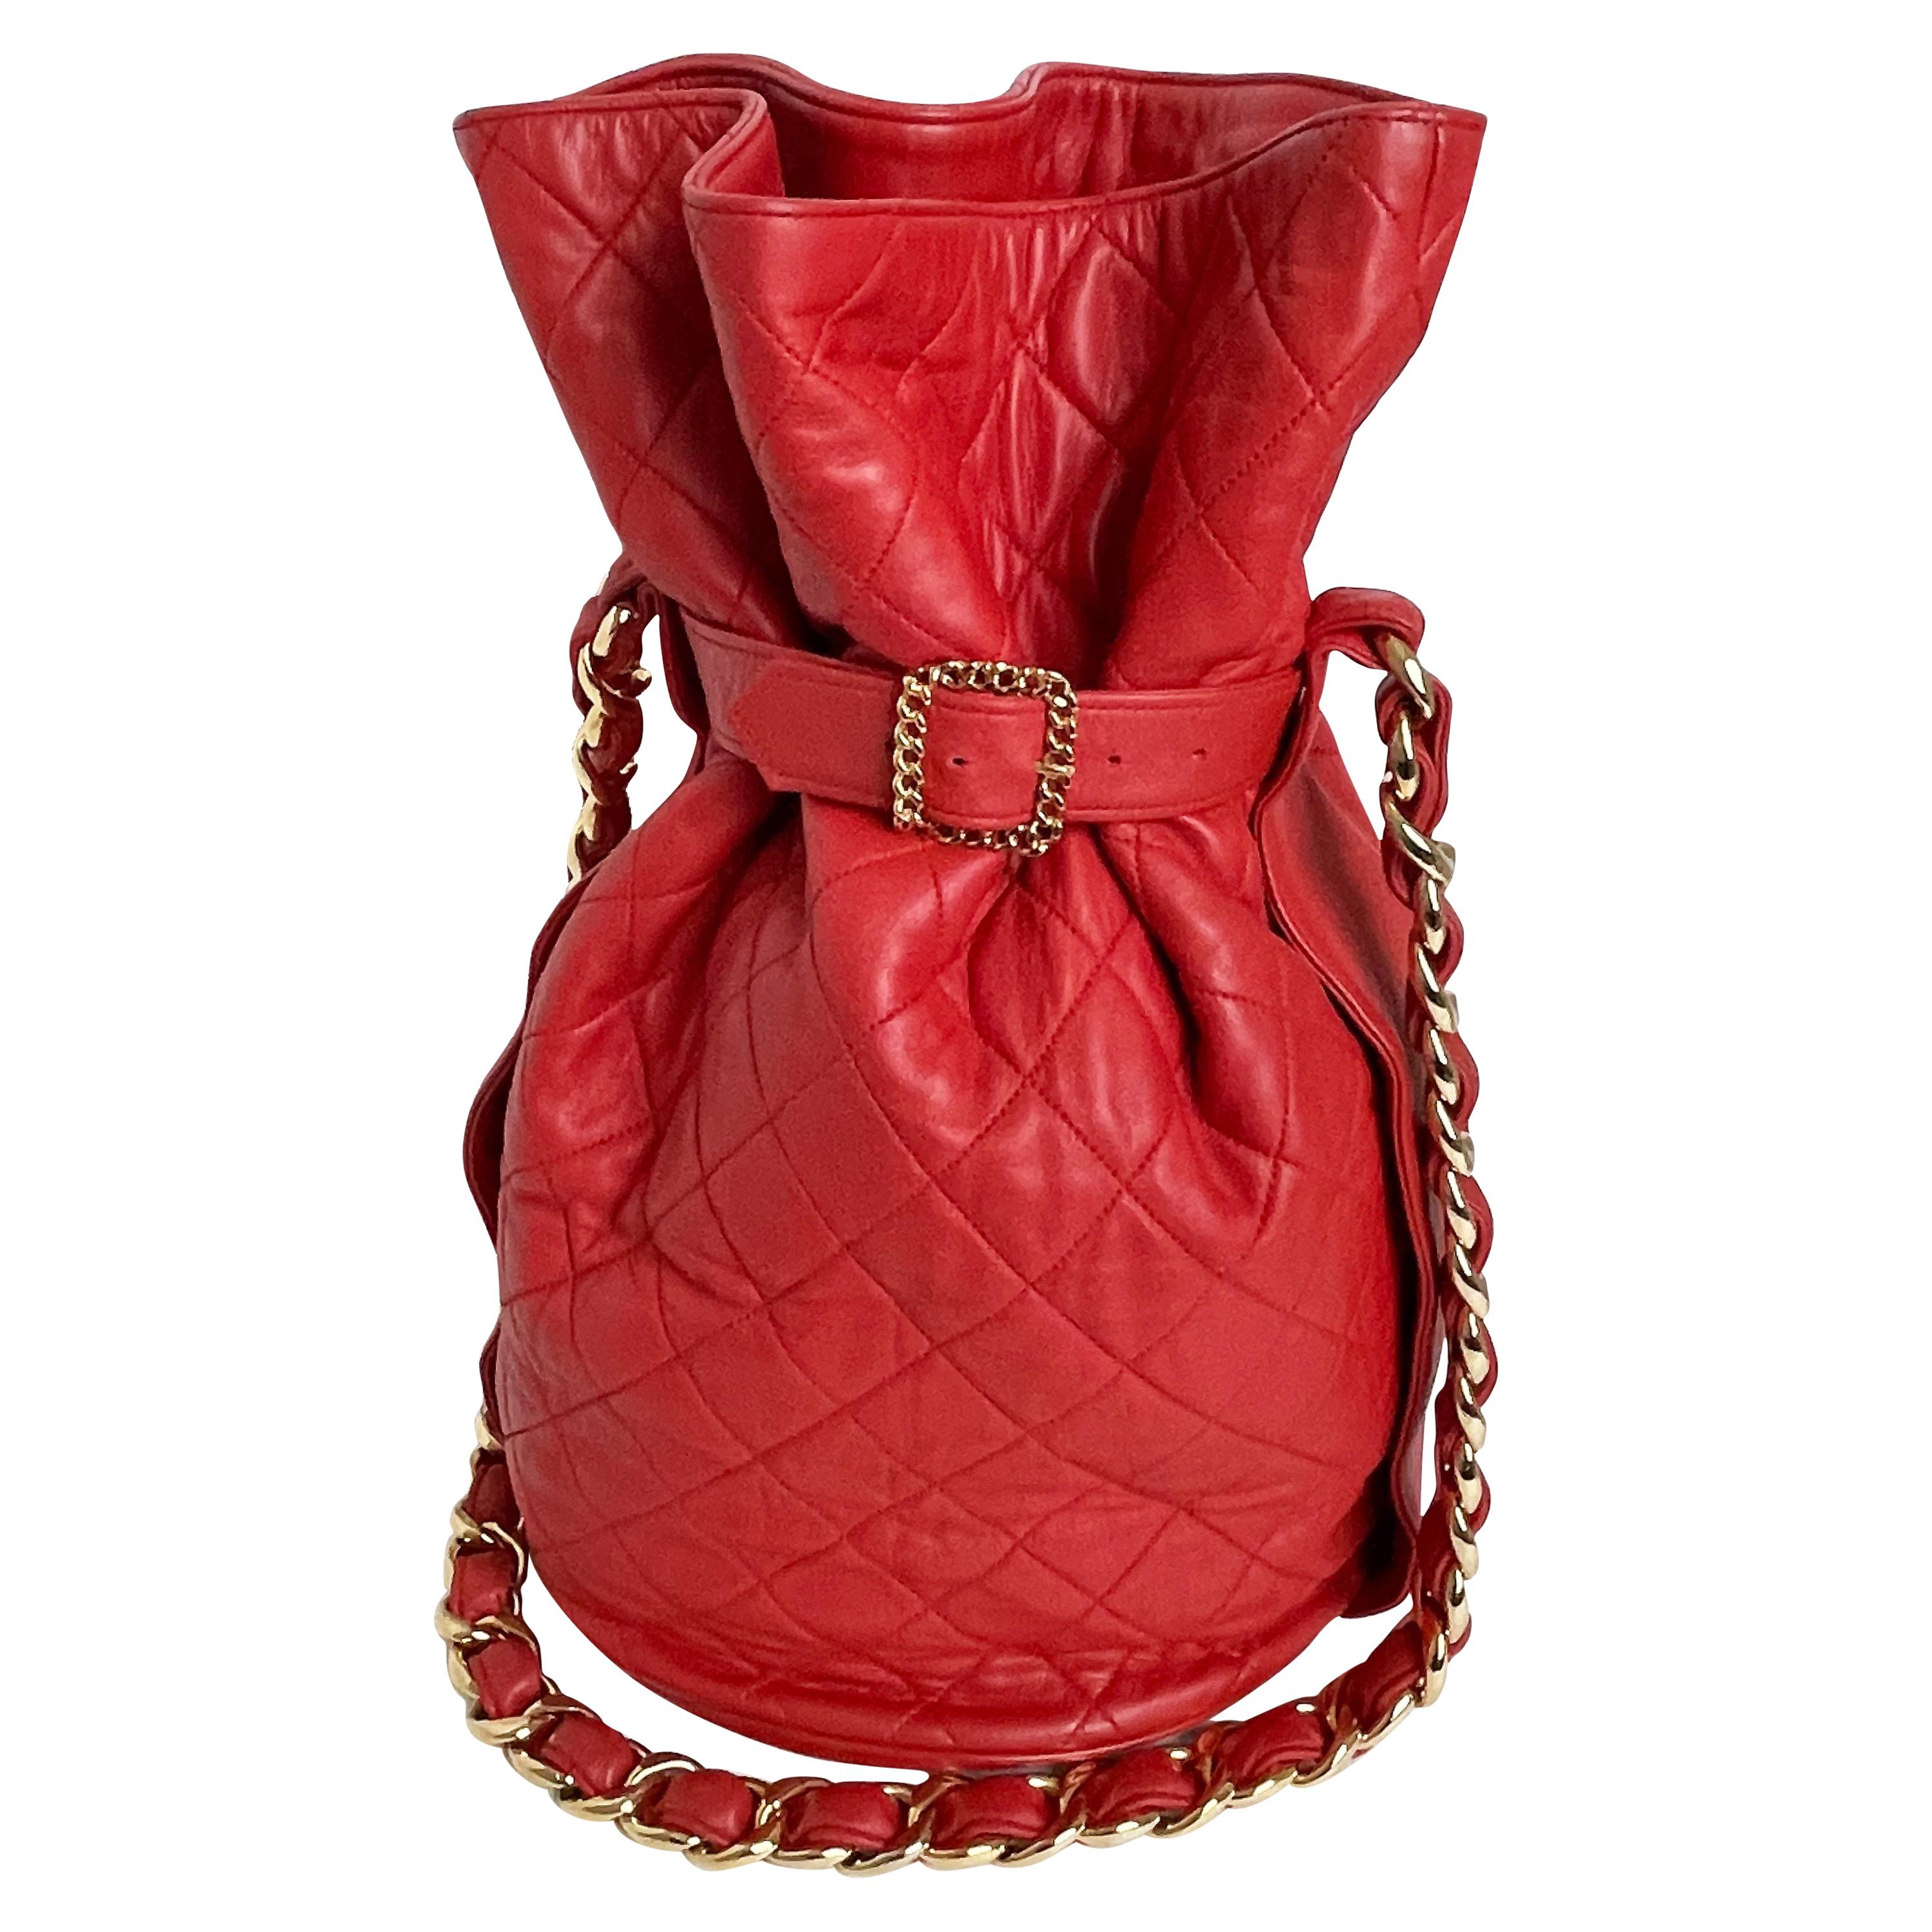 Vintage Chanel Buckle Bag Red Matelasse Leather with Chain Strap F/W 1992 Rare For Sale